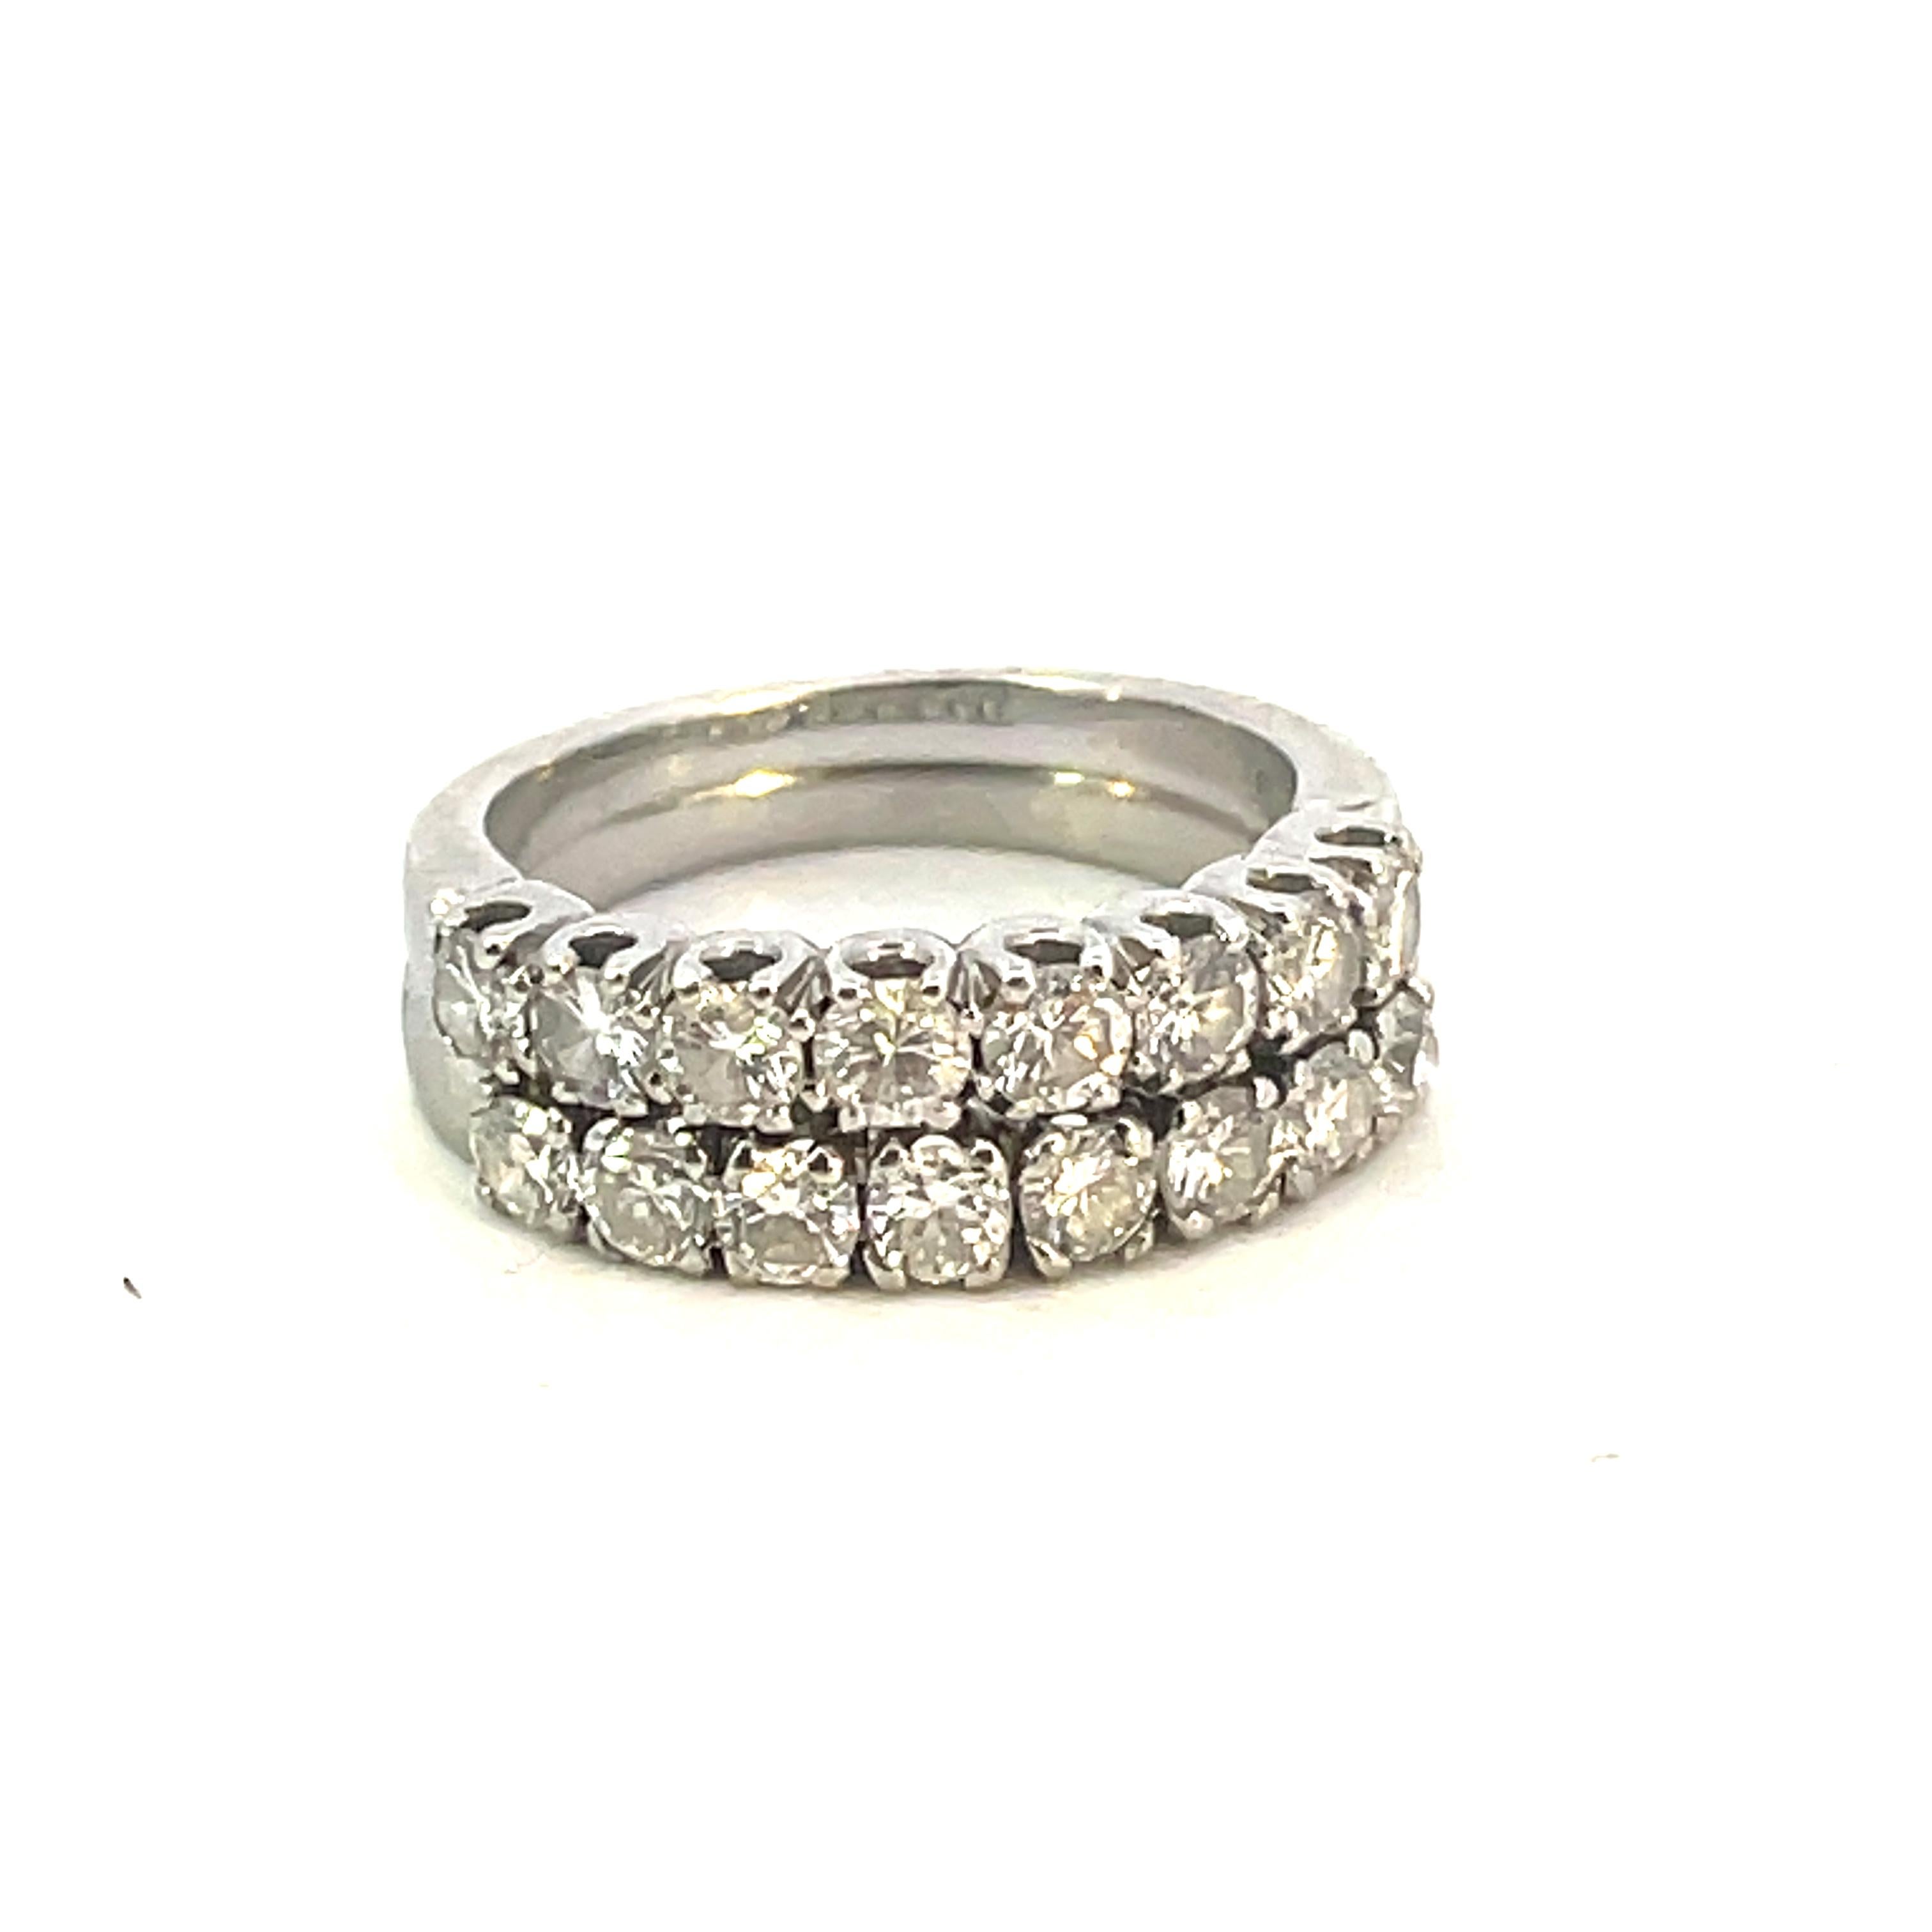 A diamond half eternity platinum ring, the seven round brilliant-cut diamonds weights all about 0.07 cts each ,  estimated to weigh 0.56 carats in total, all claw set to a 18Kt White Gold mount.

This ring is in excellent condition.

This classic